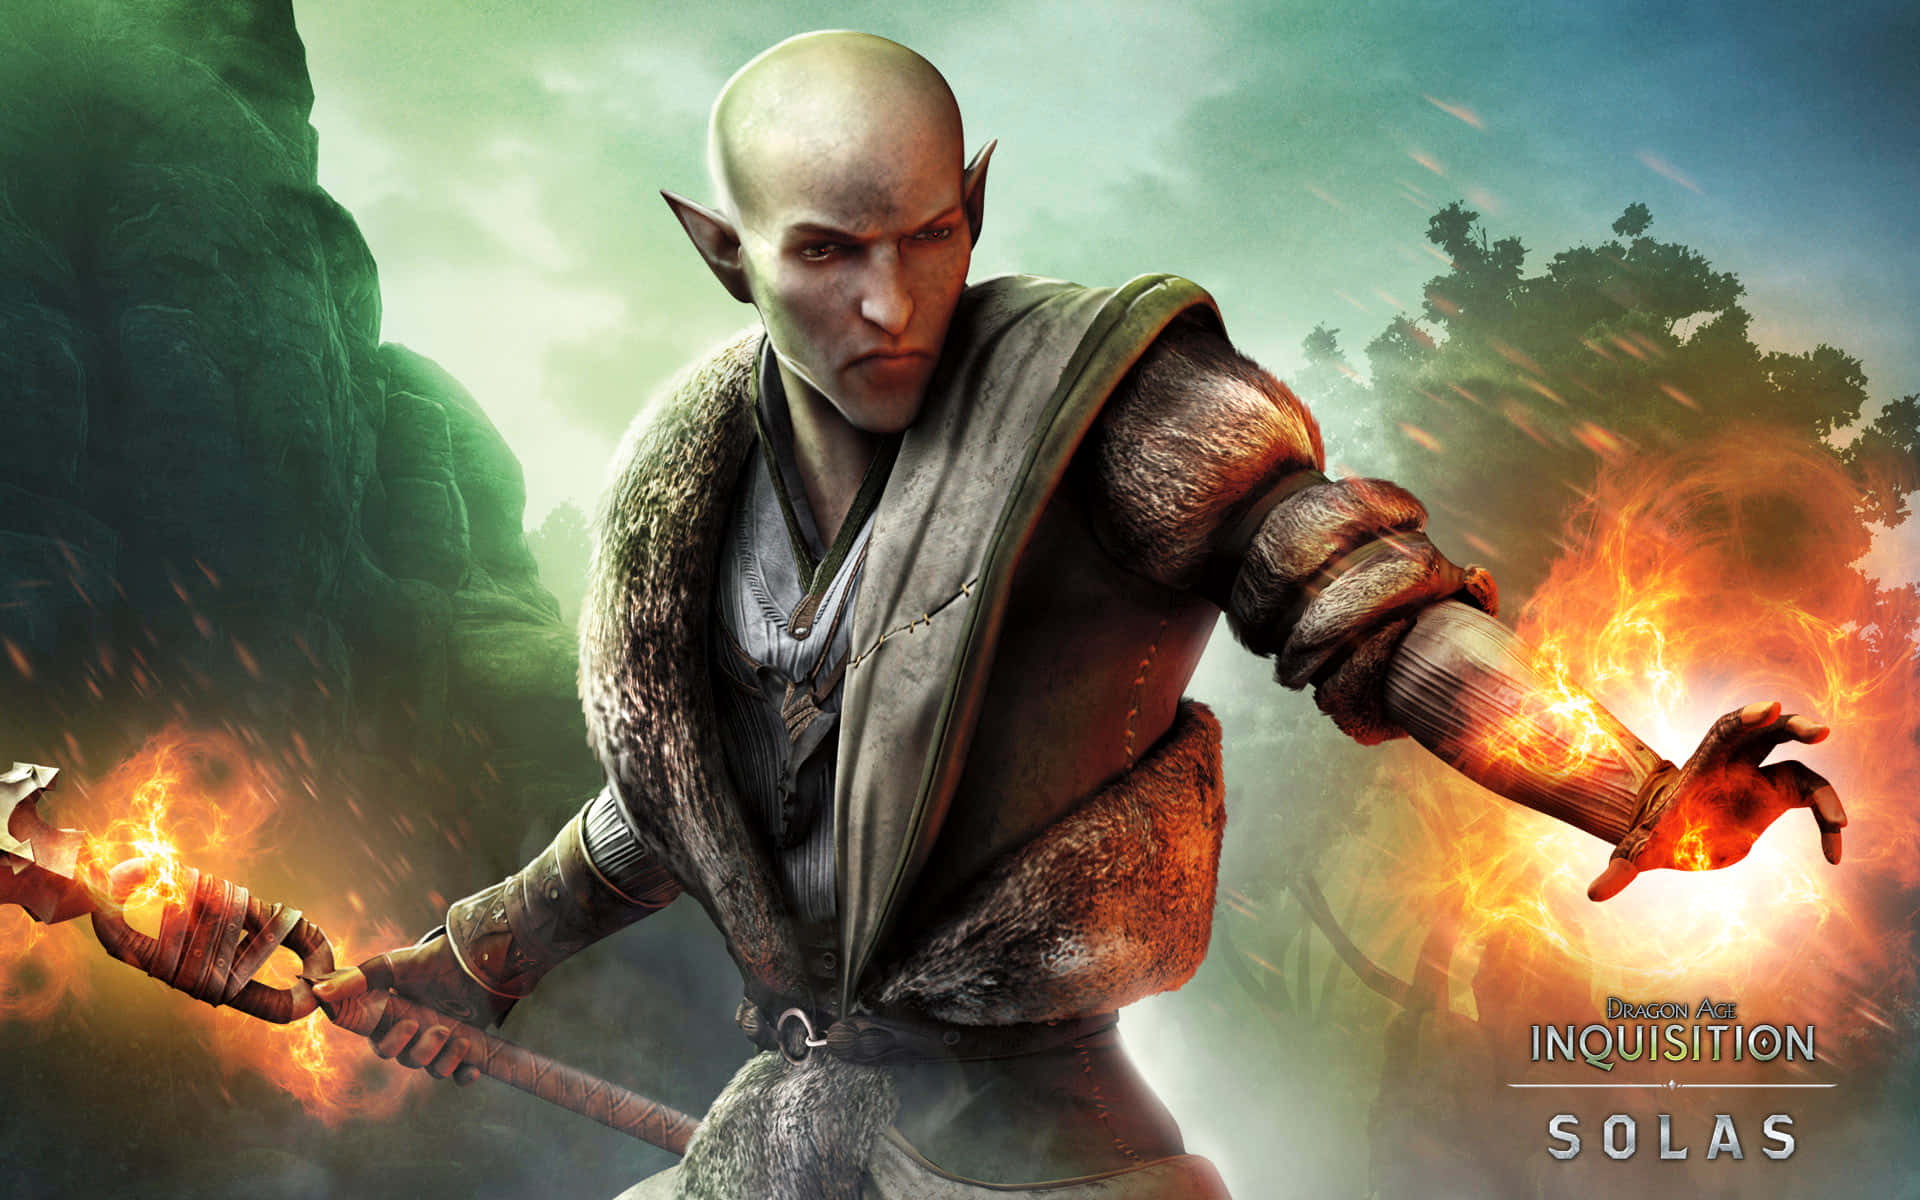 Epic adventure begins in Dragon Age Inquisition